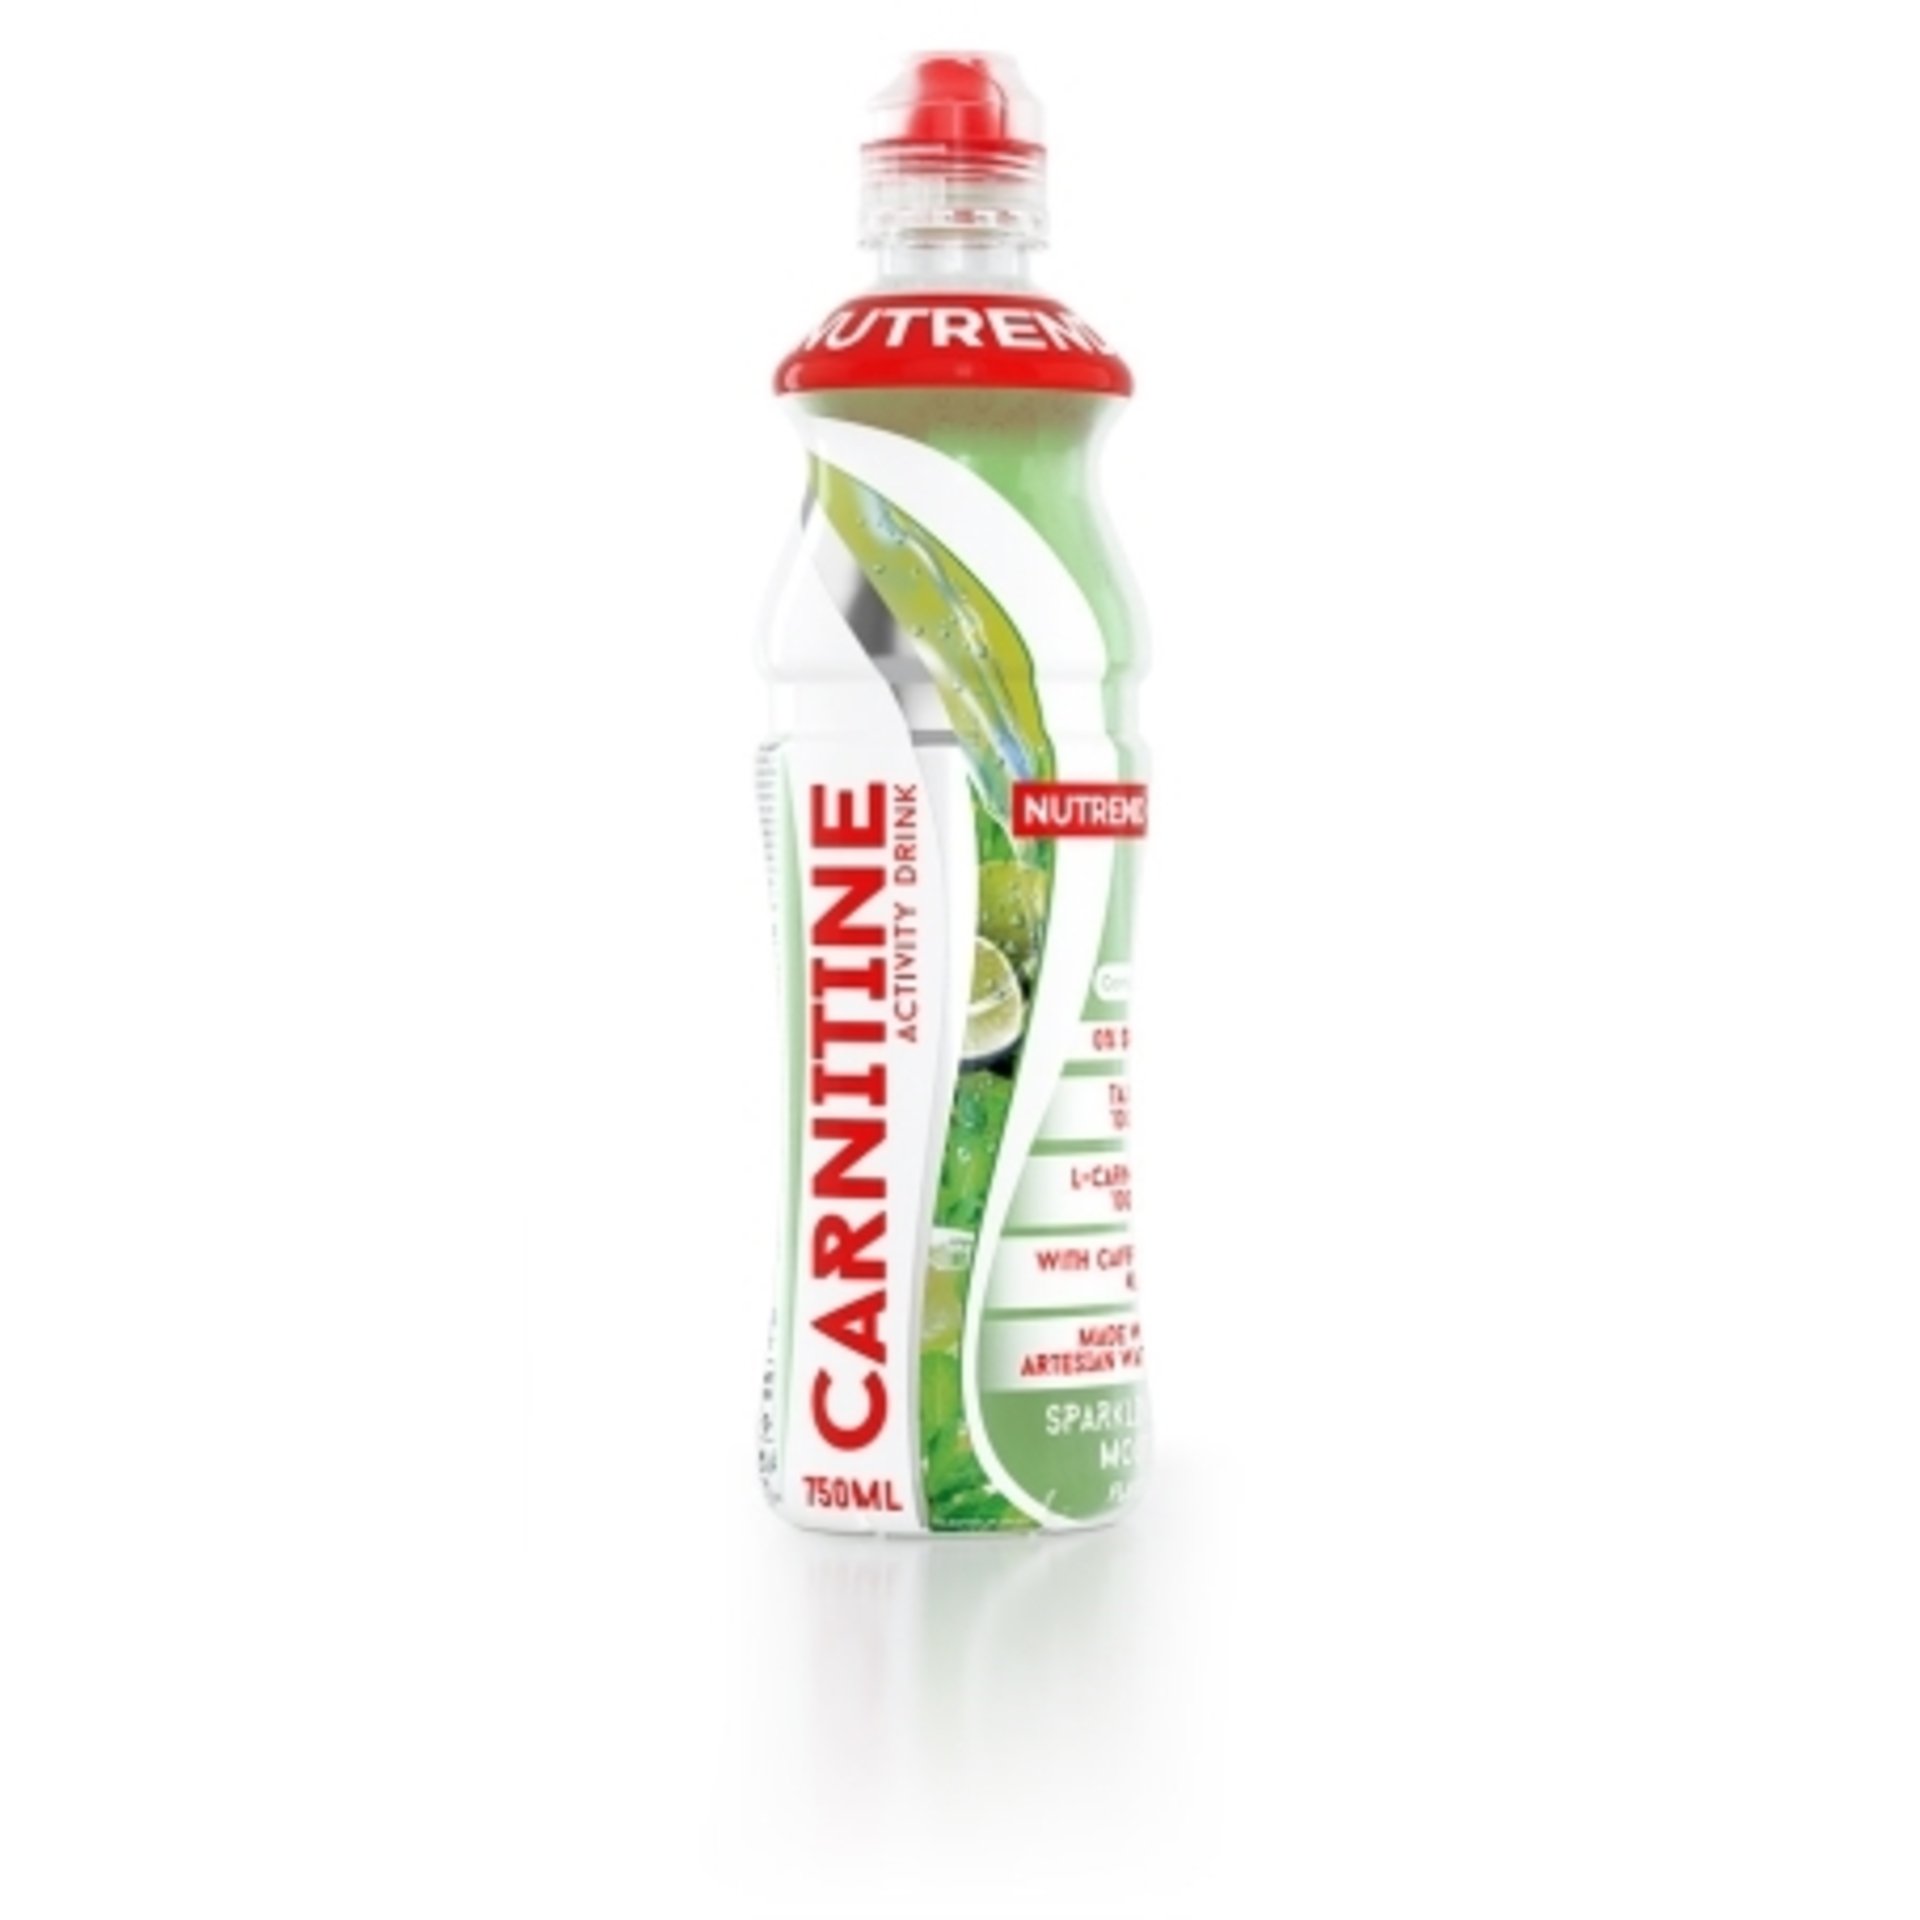 E-shop Nutrend Carnitine activity drink with caffeine 750 ml - mojito